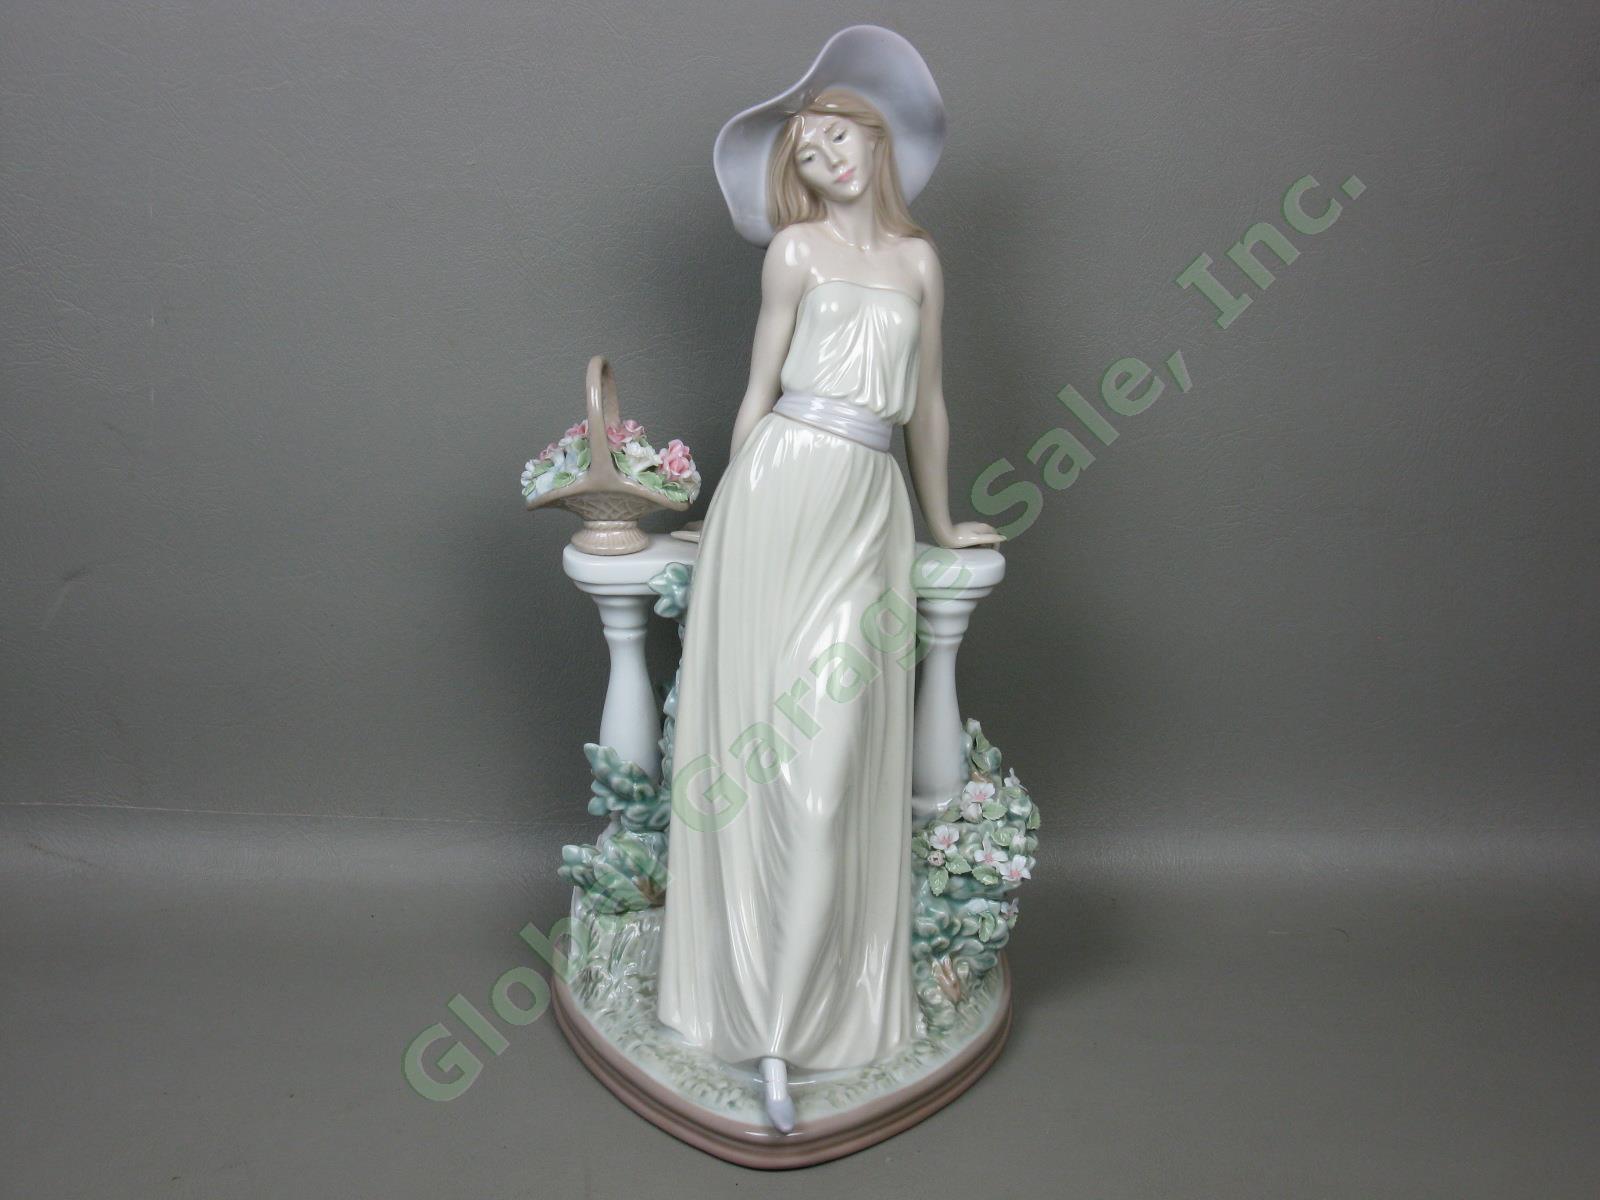 Vtg Lladro #5378 Time For Reflection 13.5" Figurine 1986-1992 Woman Flowers Hat